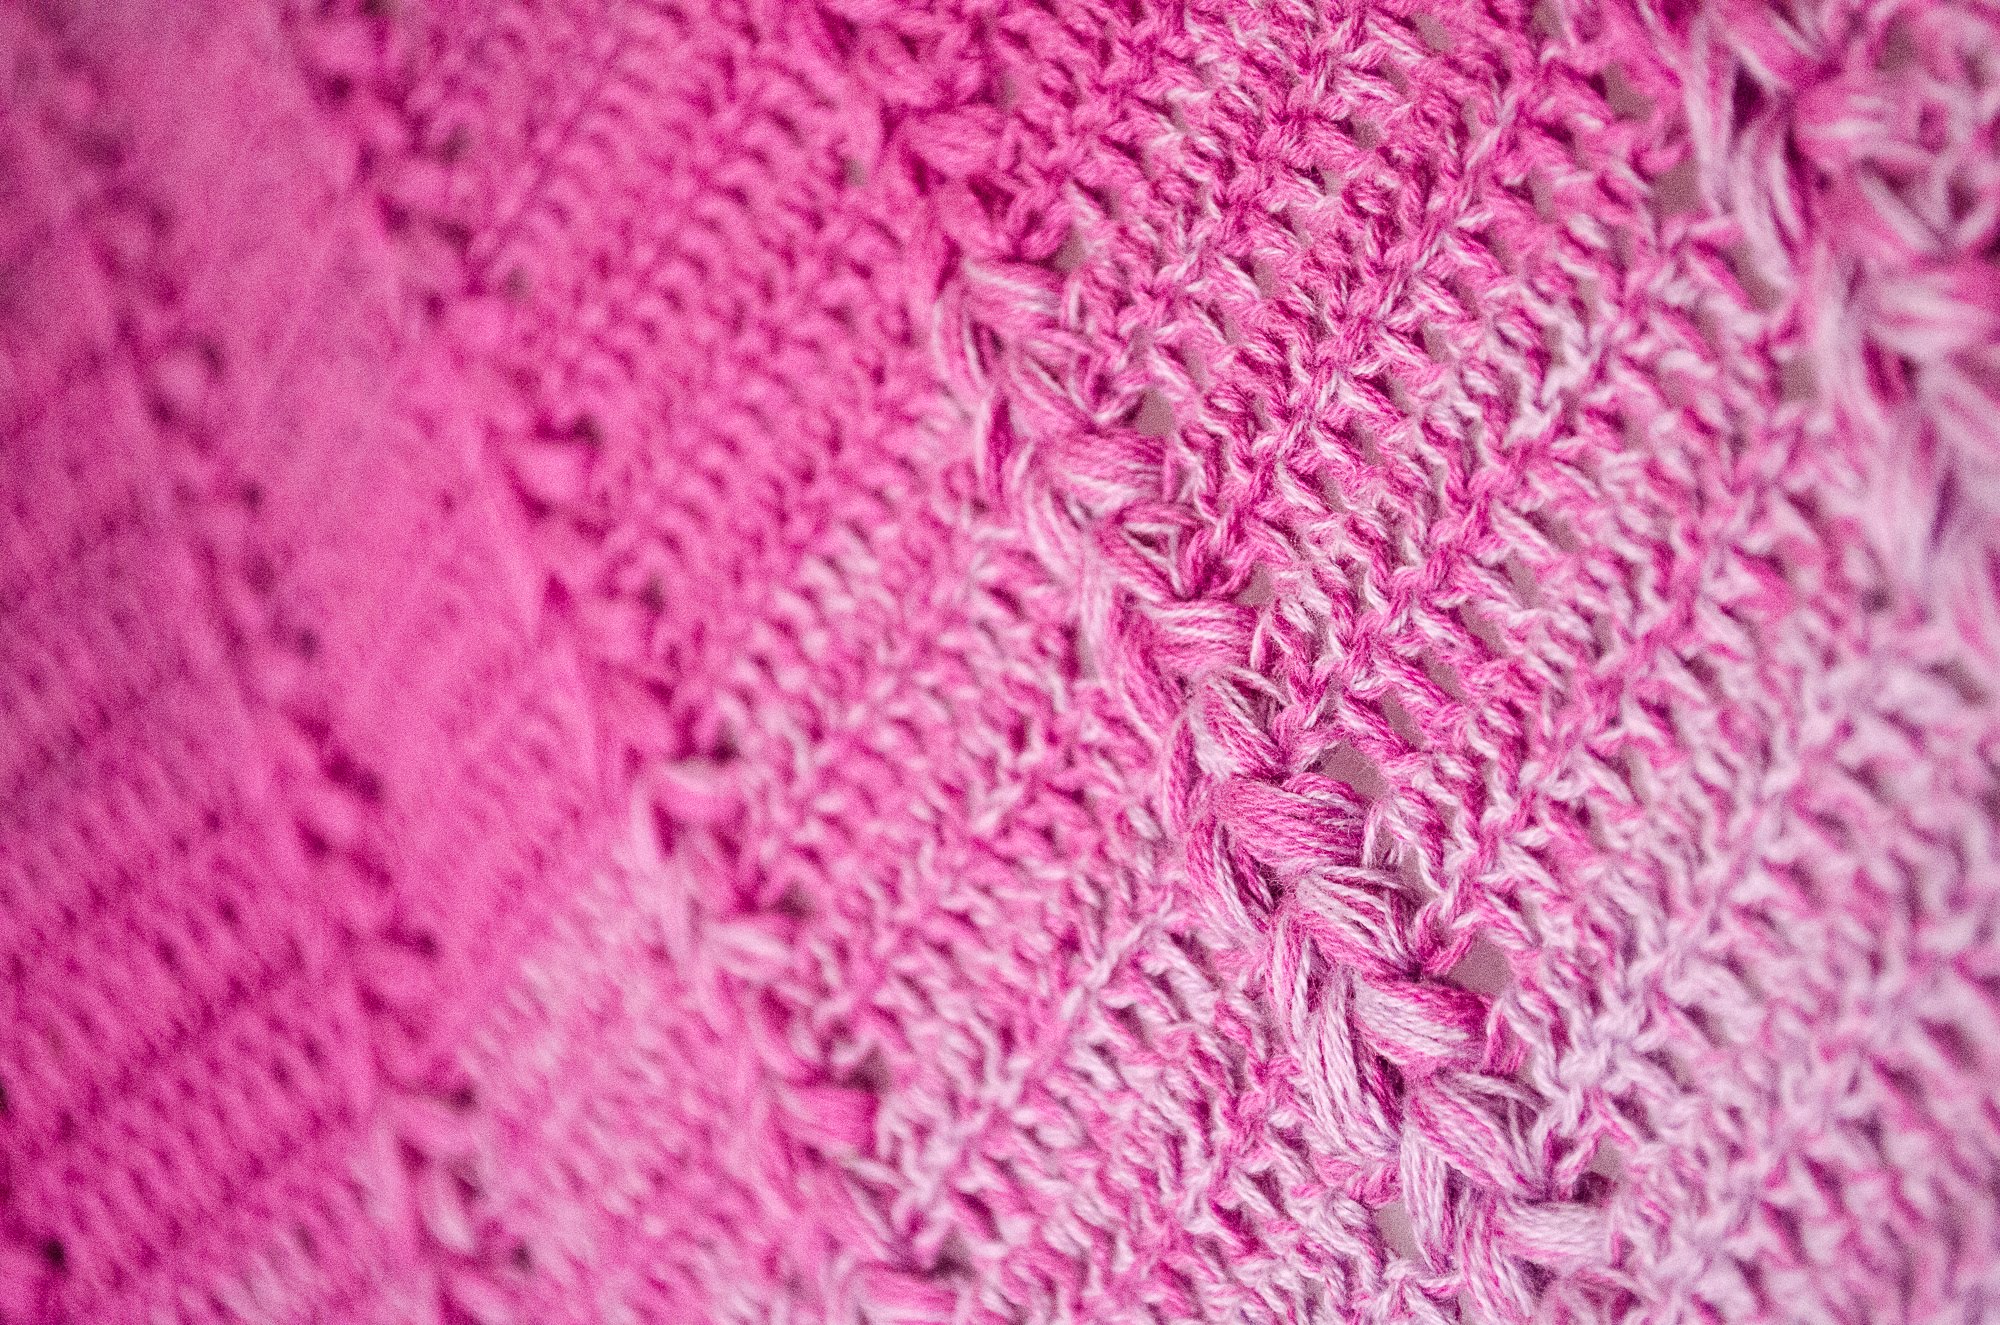 Blackberry pudding shawl gradient yarn easy pattern close-up